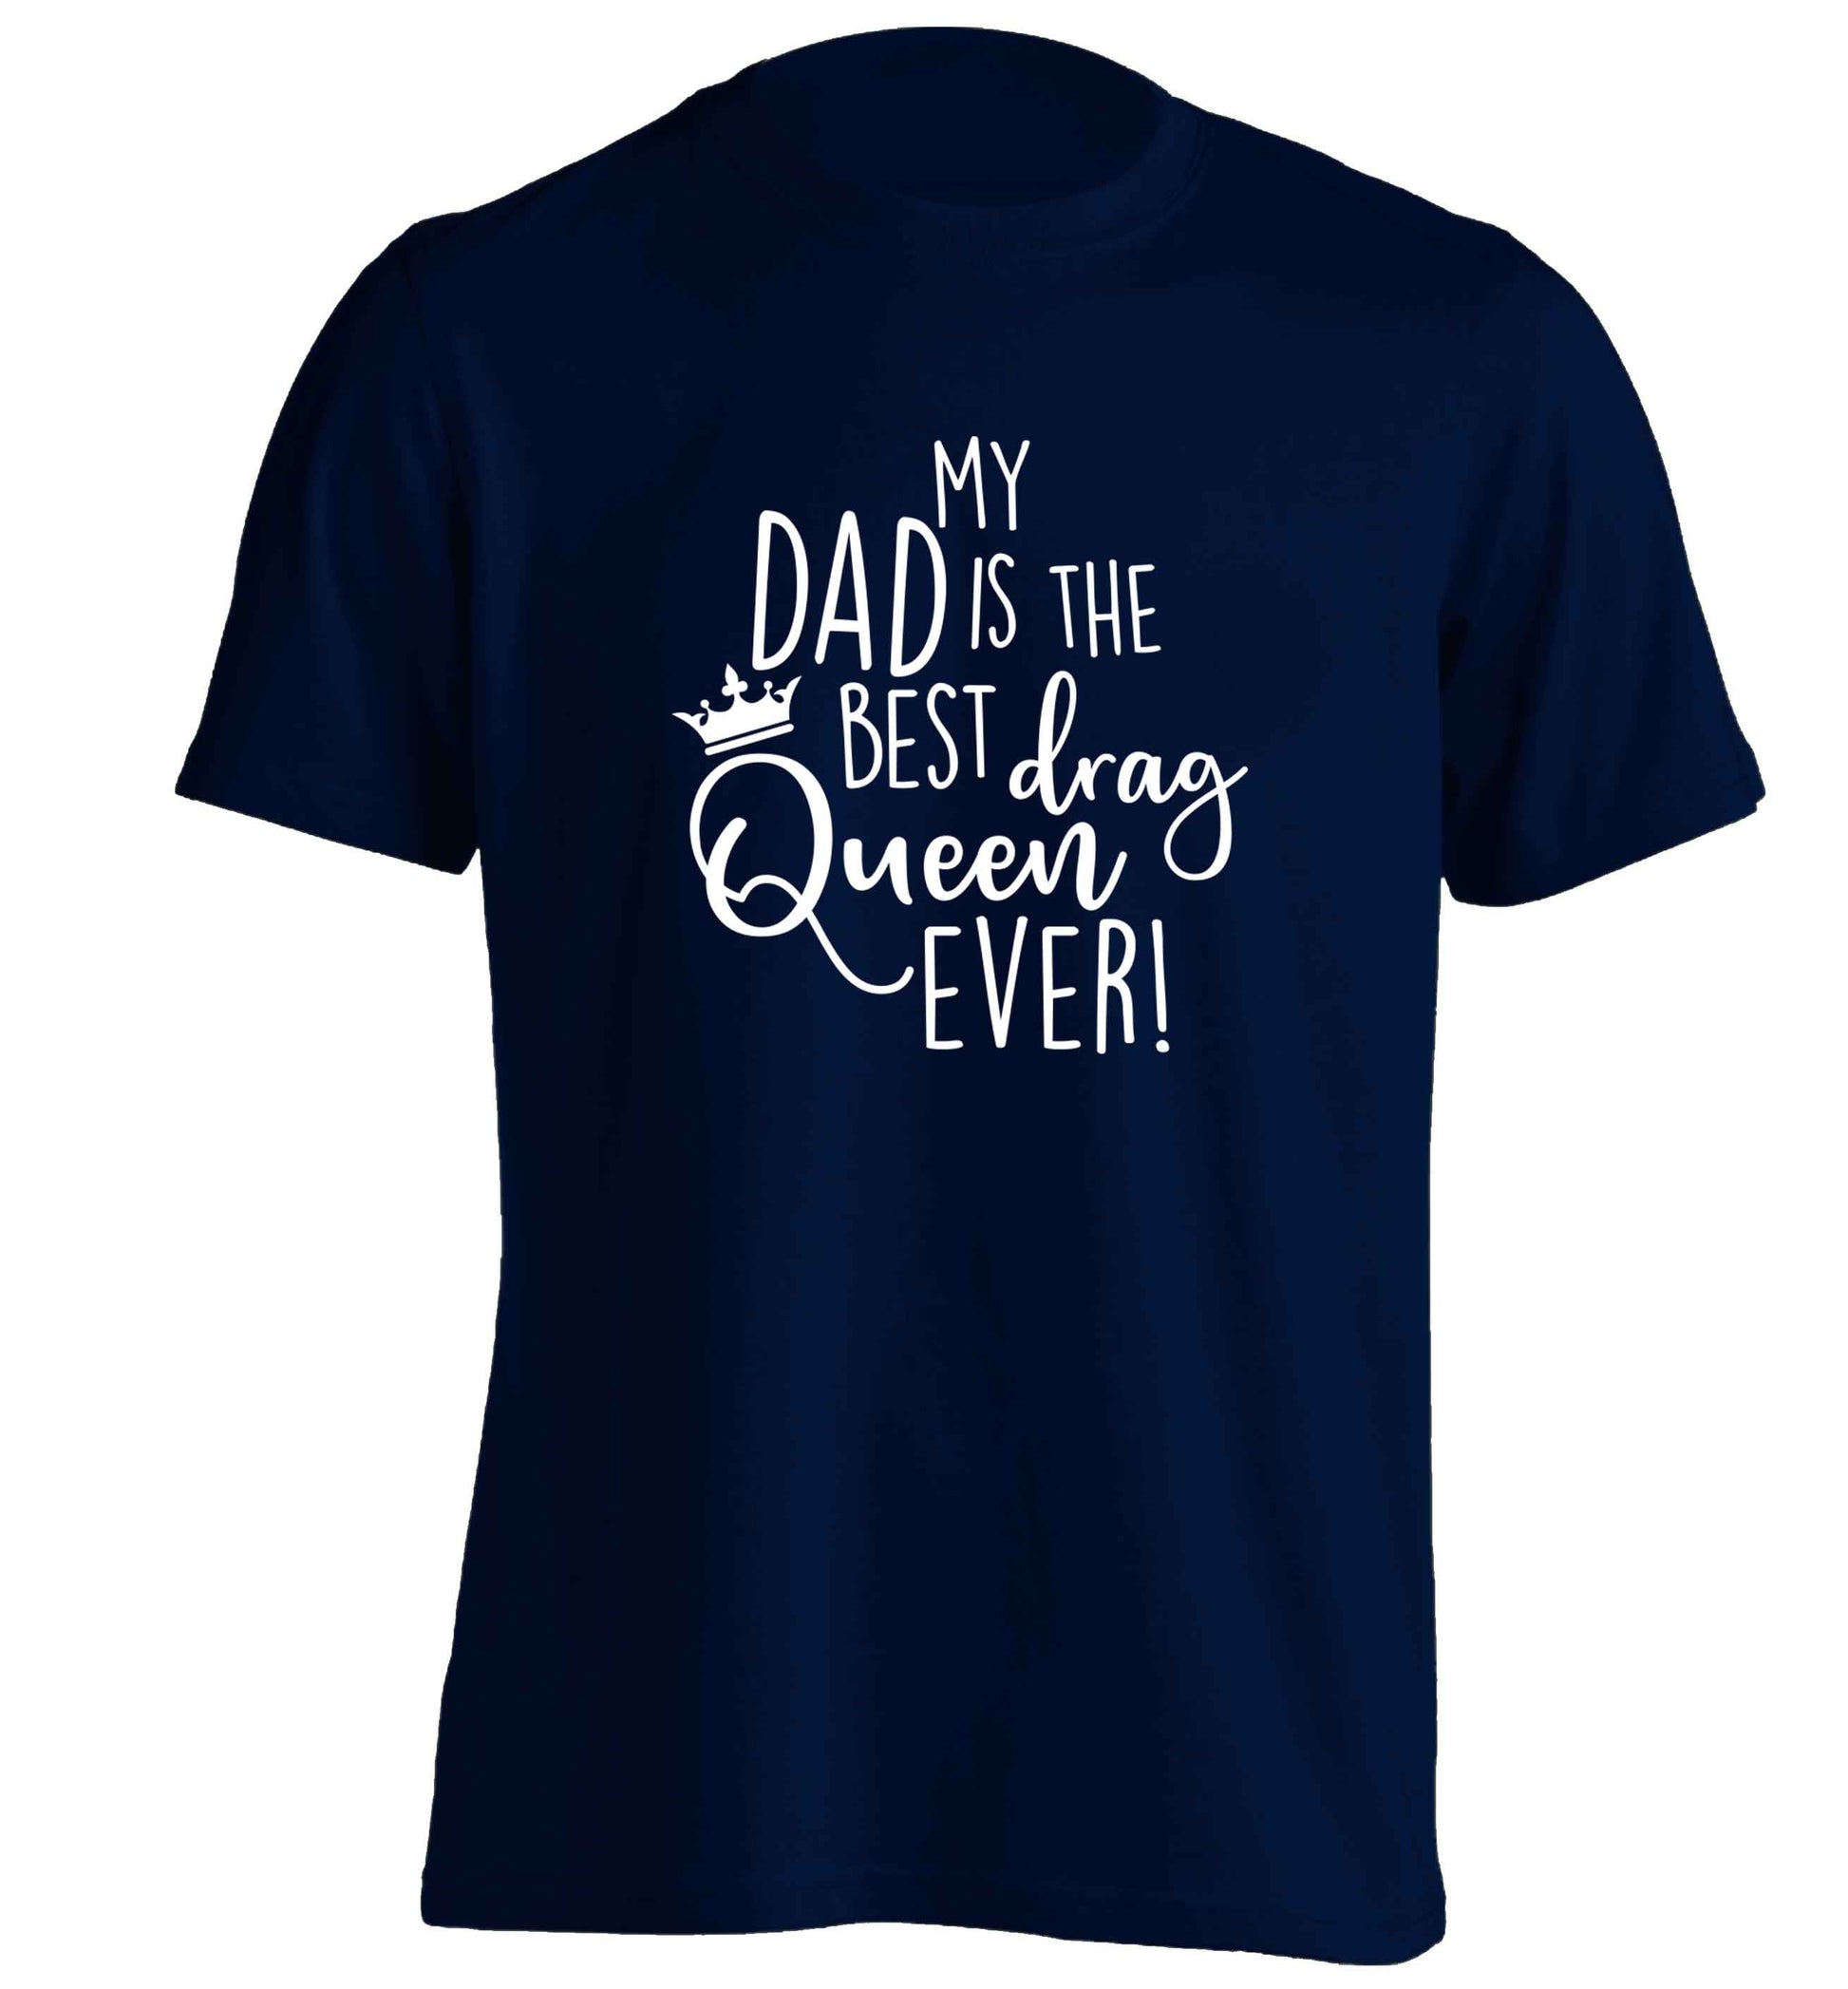 My dad is the best drag Queen ever adults unisex navy Tshirt 2XL